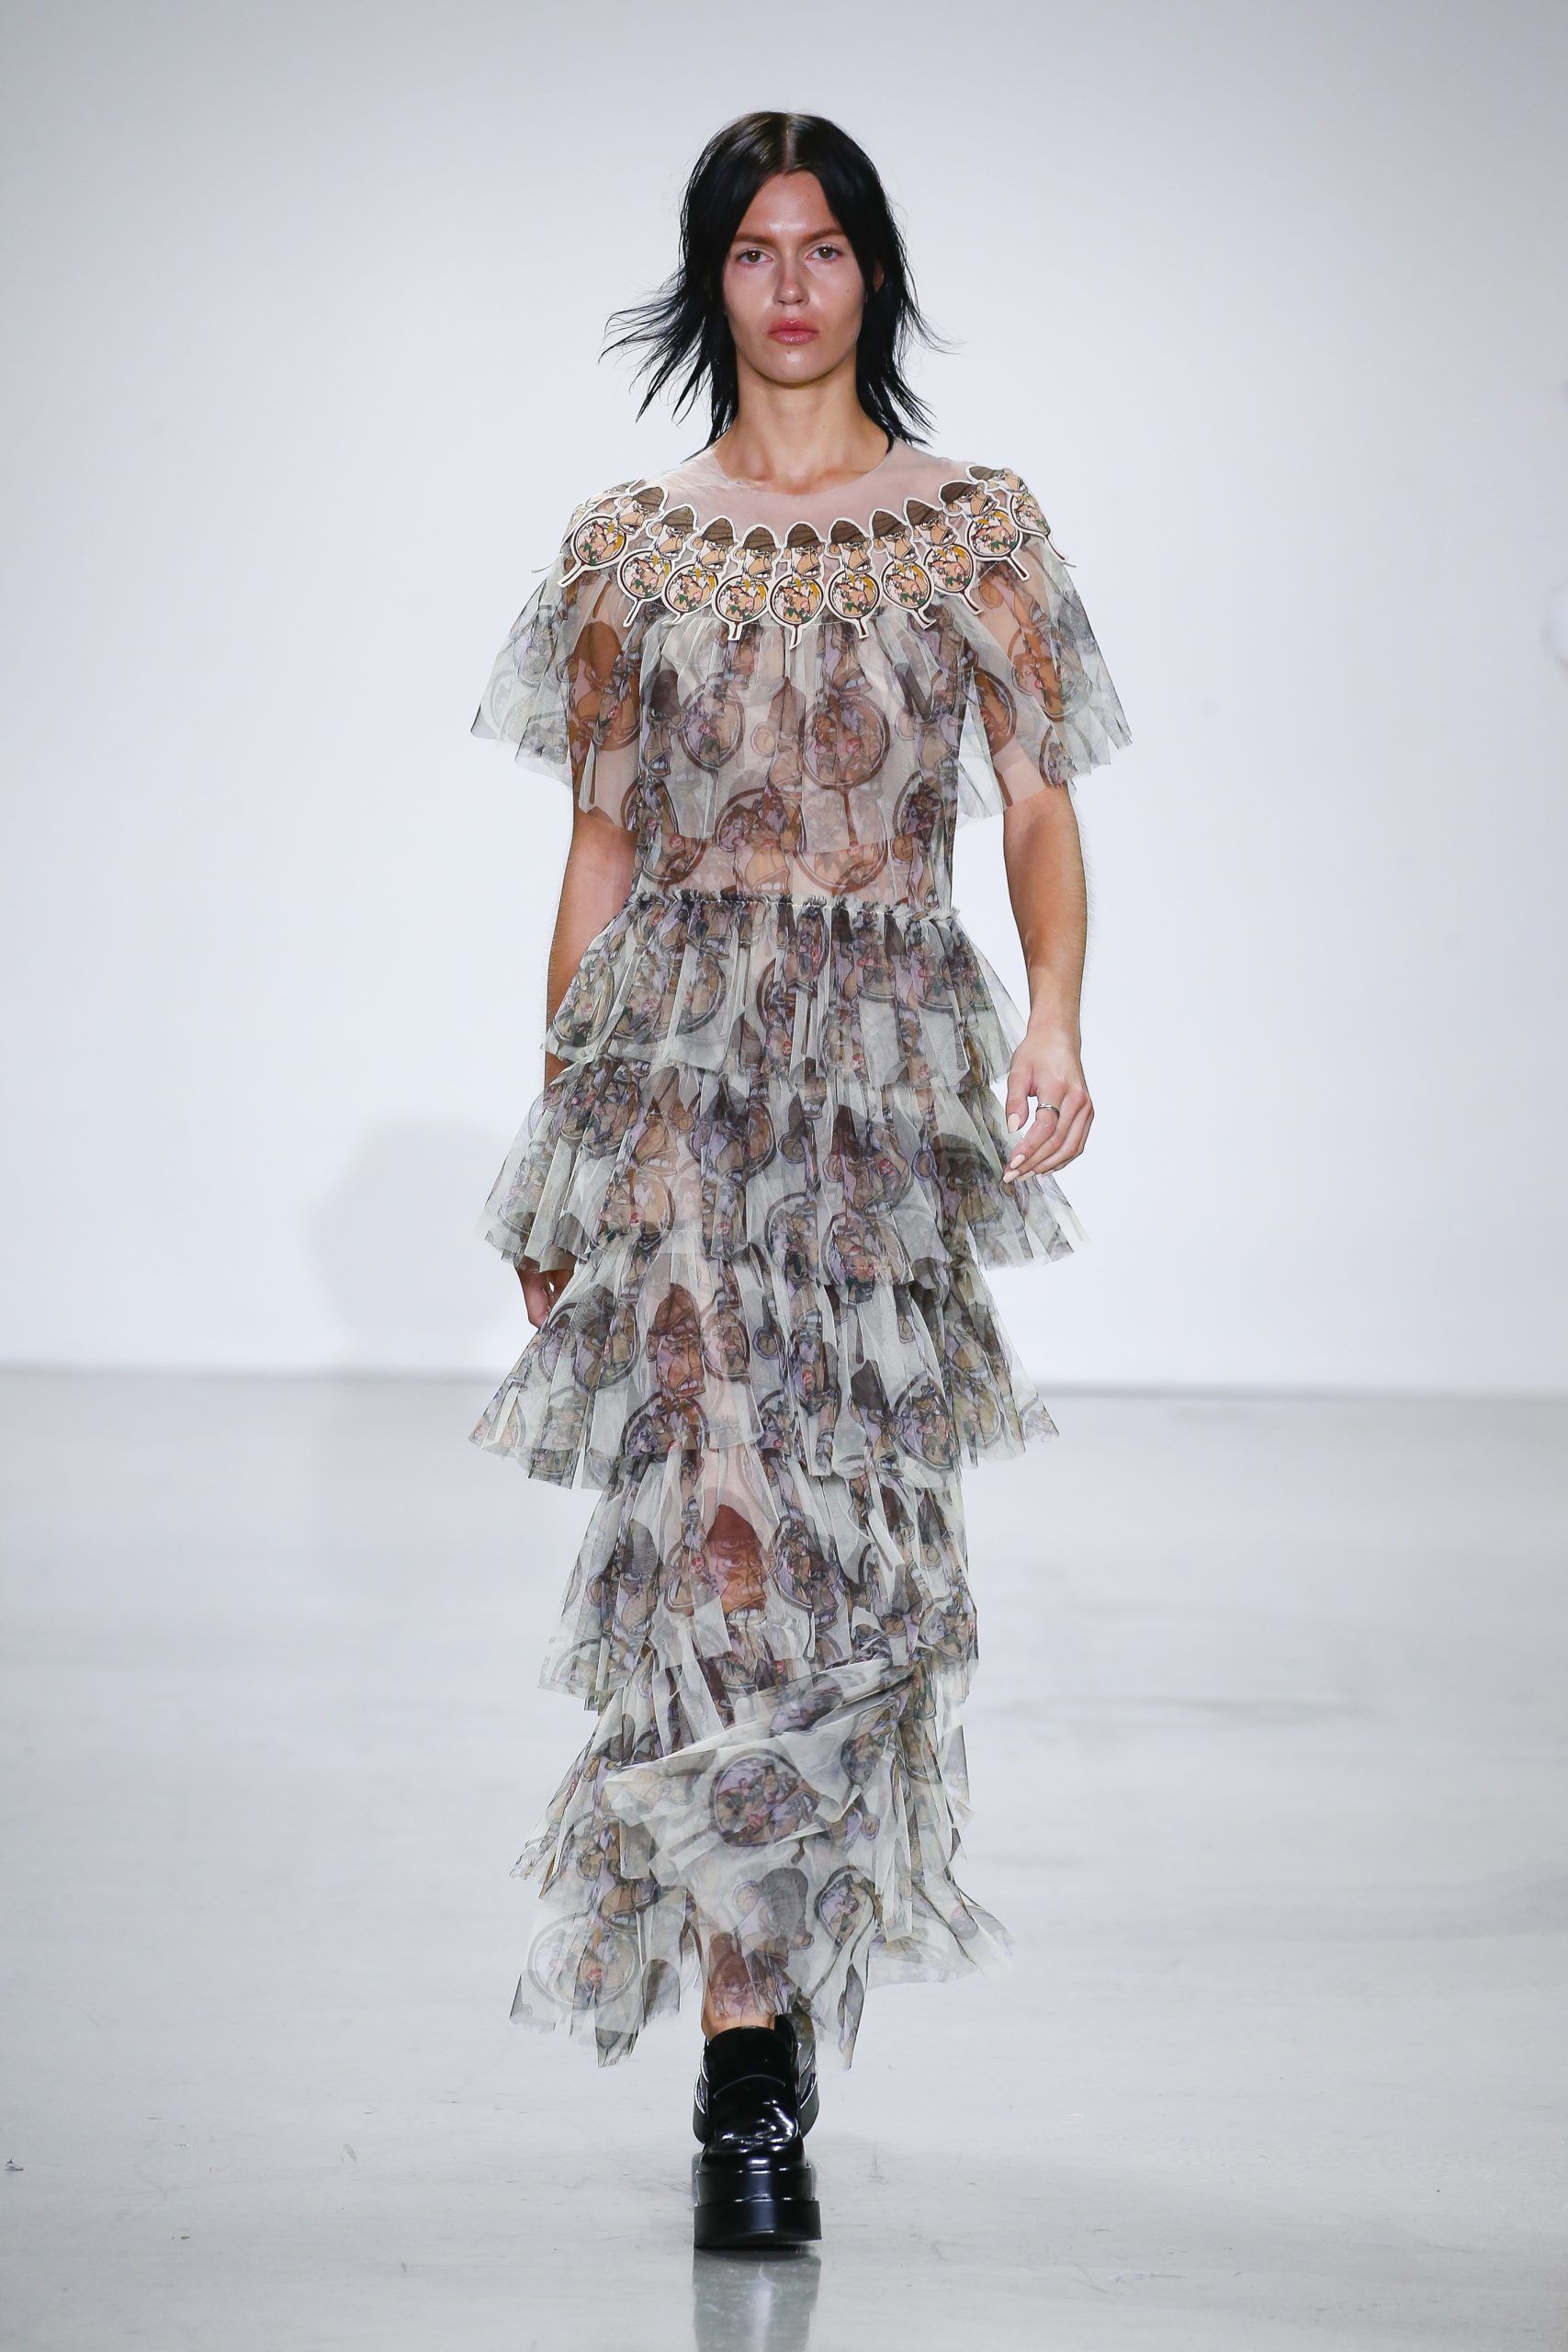 Model wearing a long flutter dress at Vivienne Tam’s Metaverse, Past, Present, and Future SS23 show at New York Fashion Week